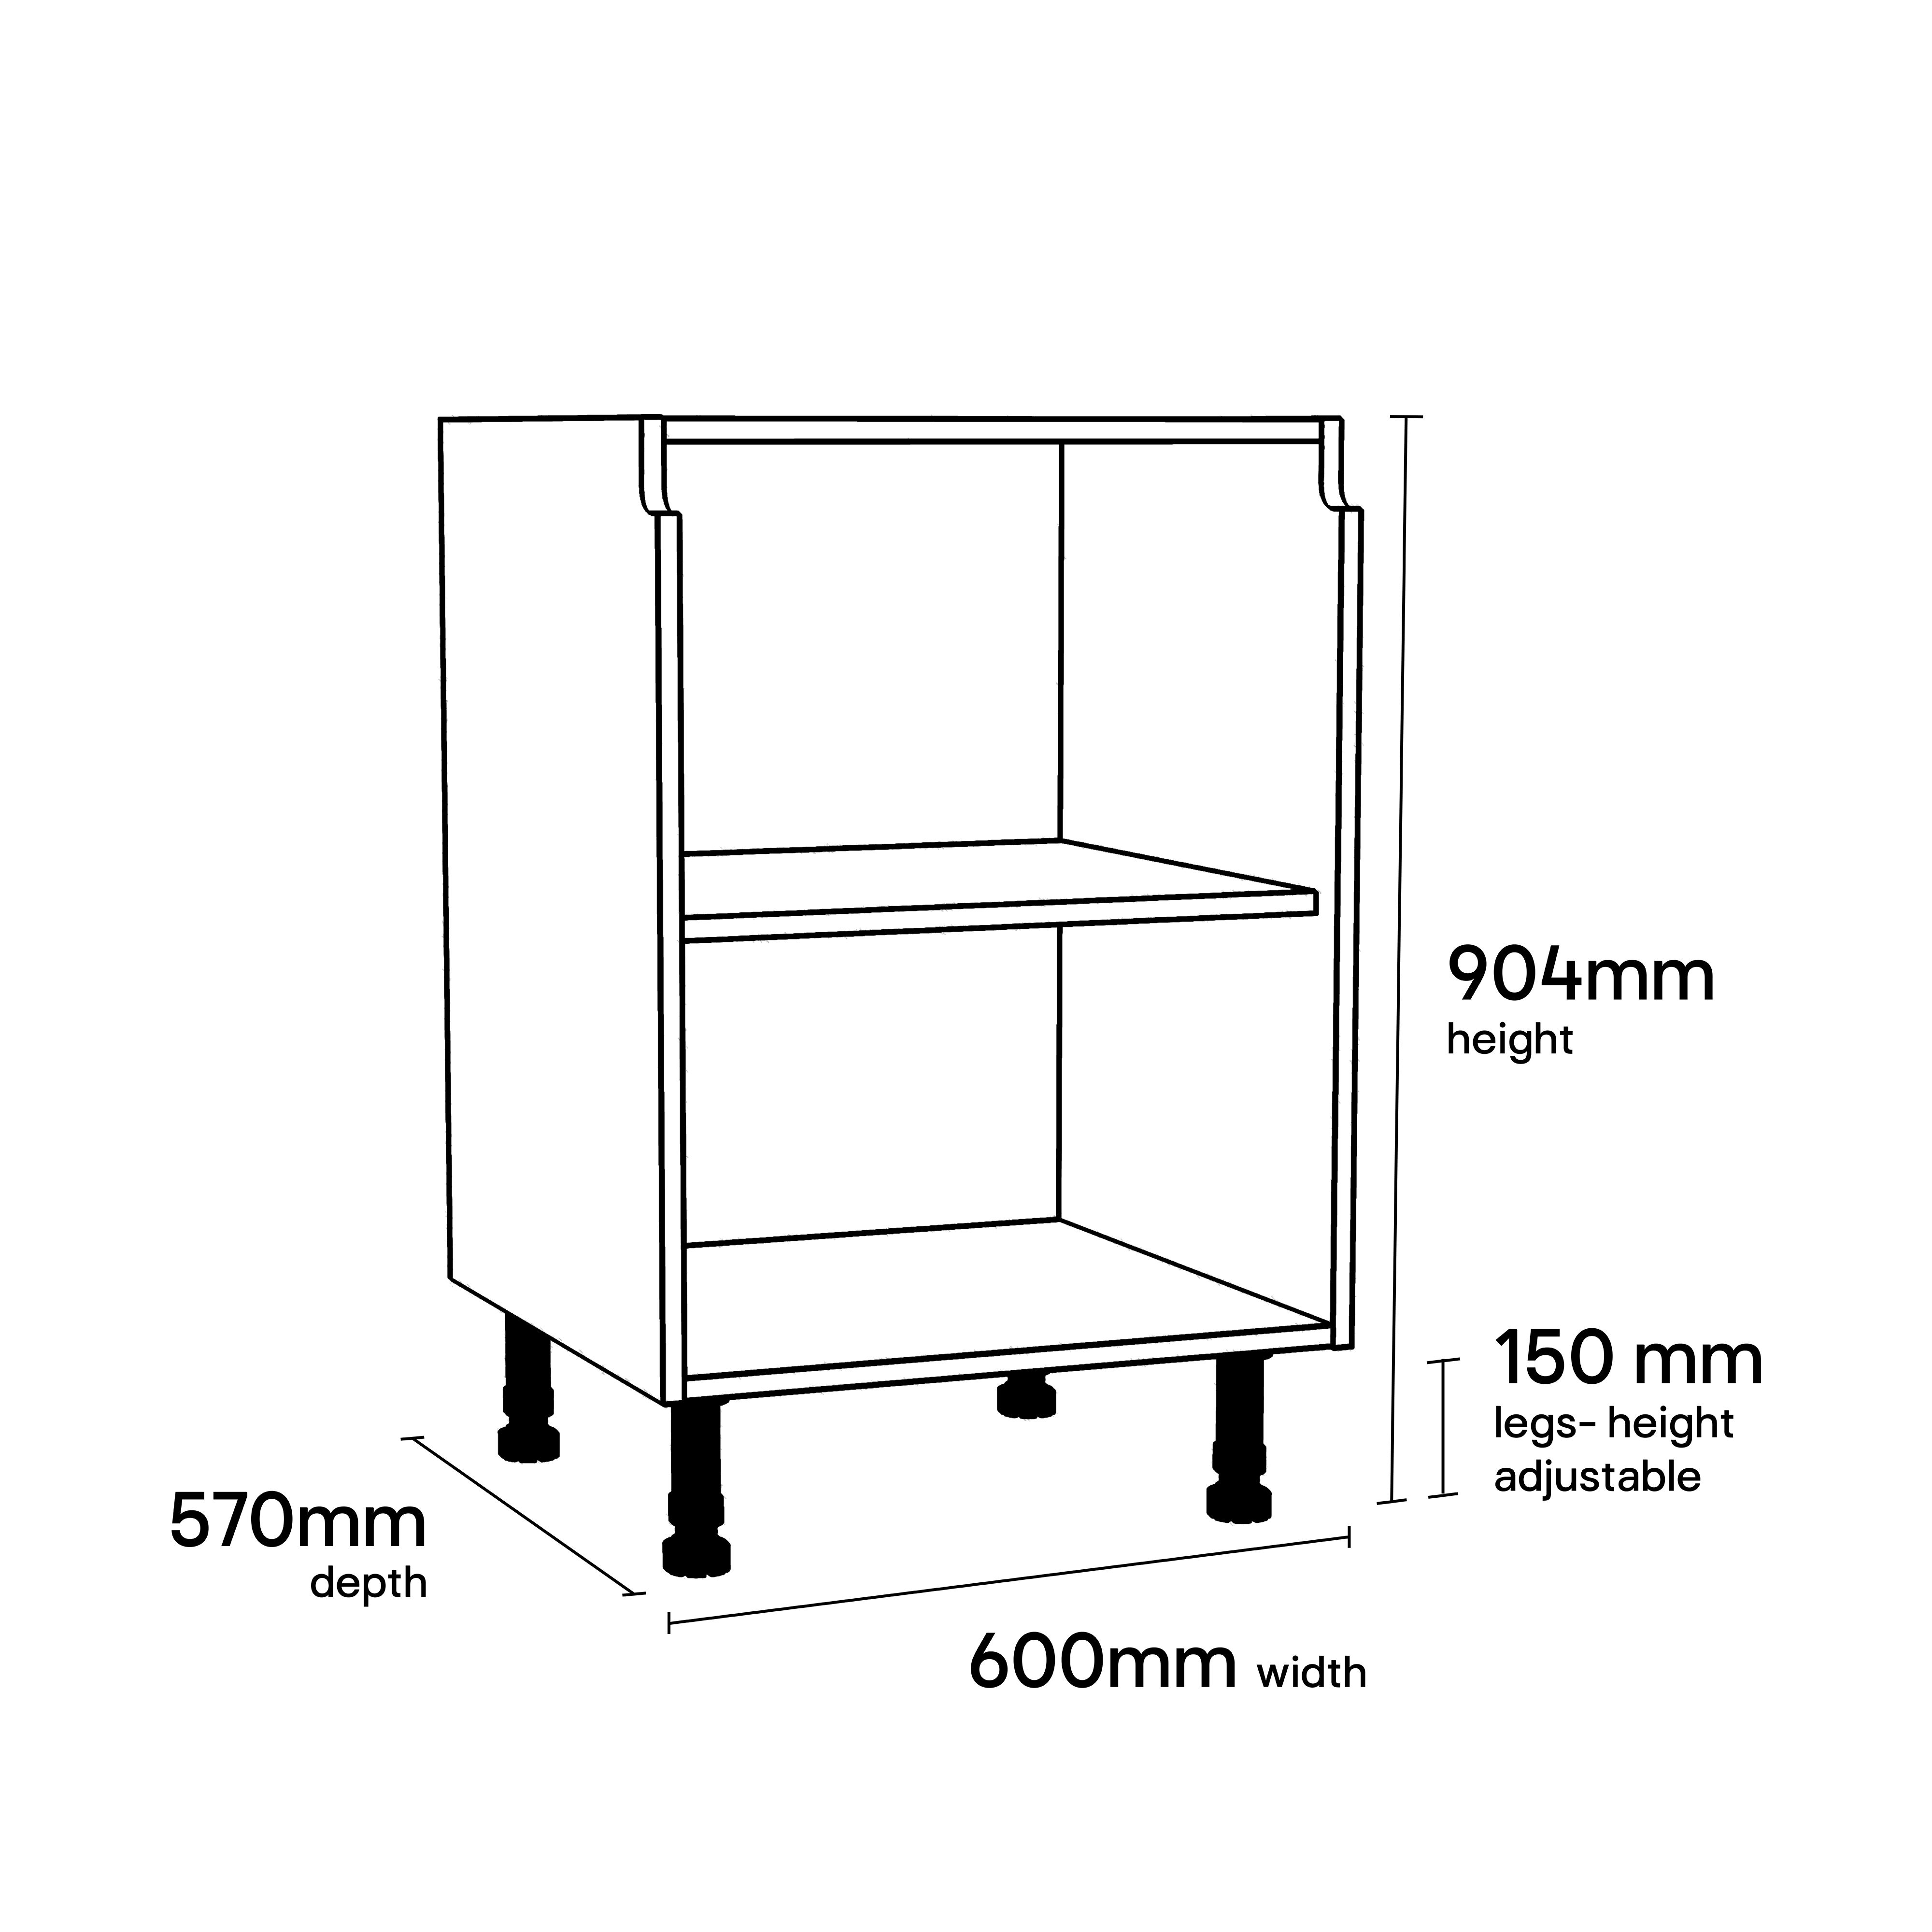 GoodHome Caraway Innovo White Base cabinet, (W)600mm